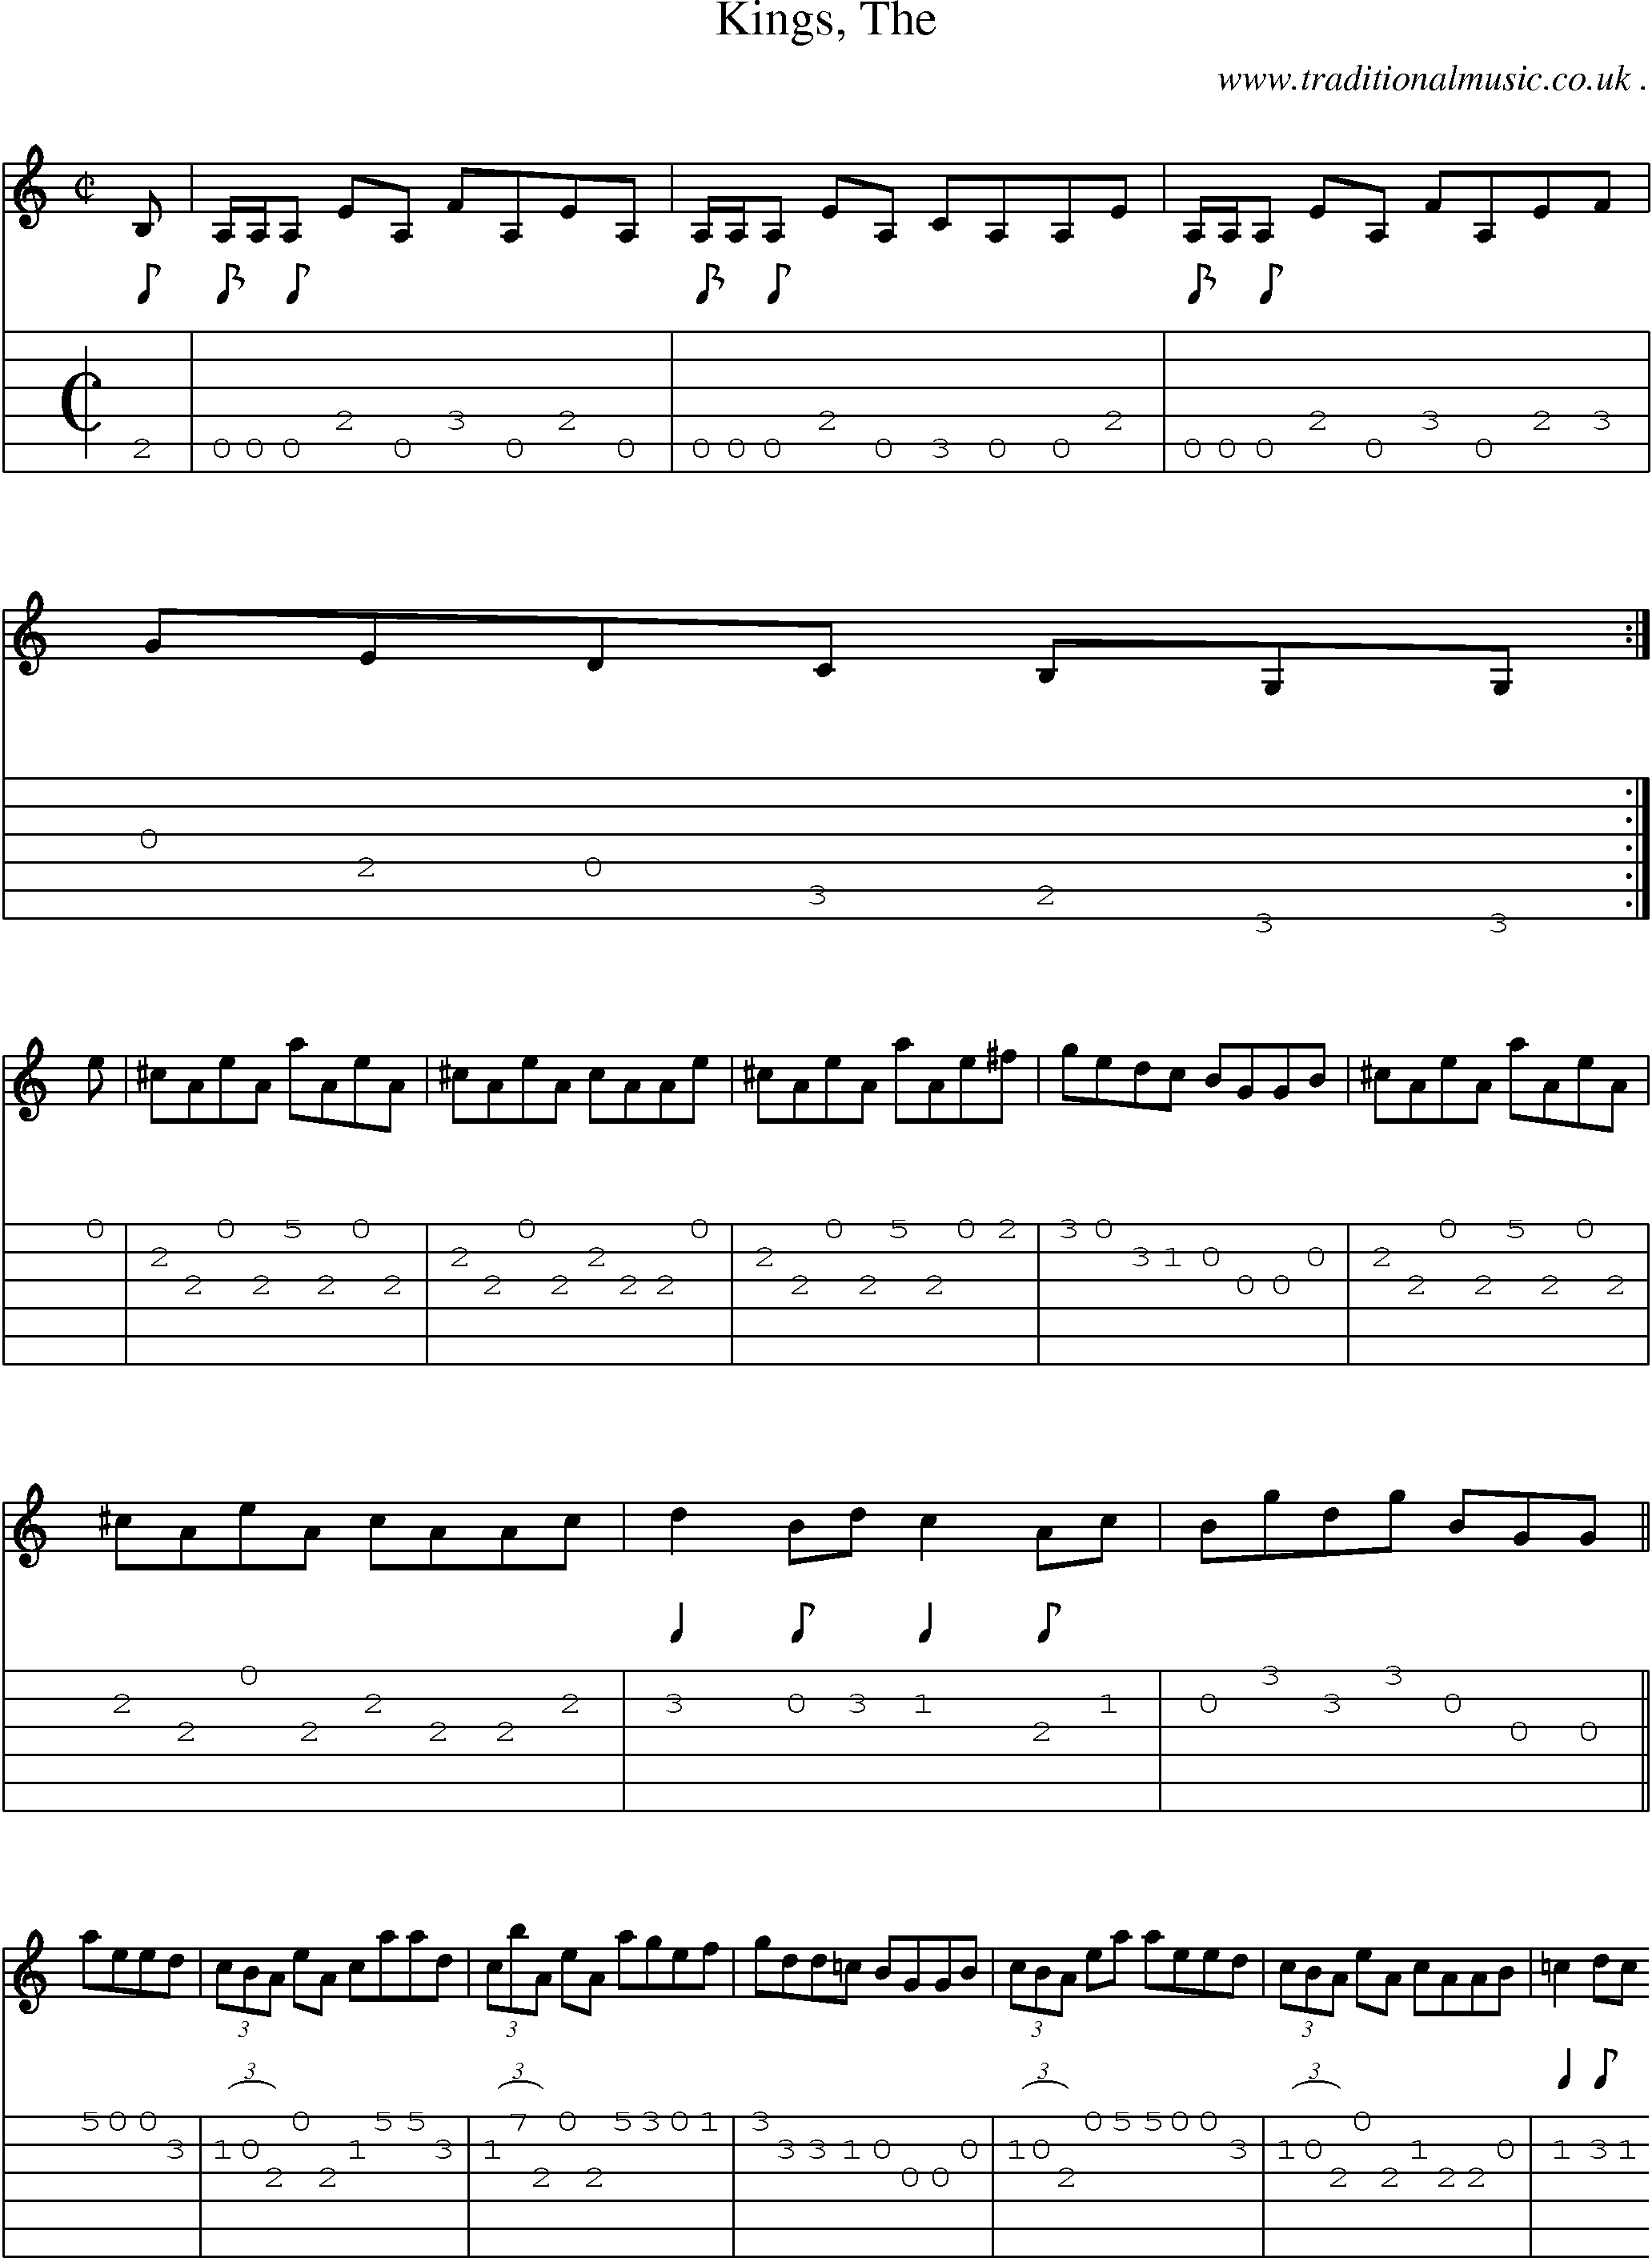 Sheet-music  score, Chords and Guitar Tabs for Kings The